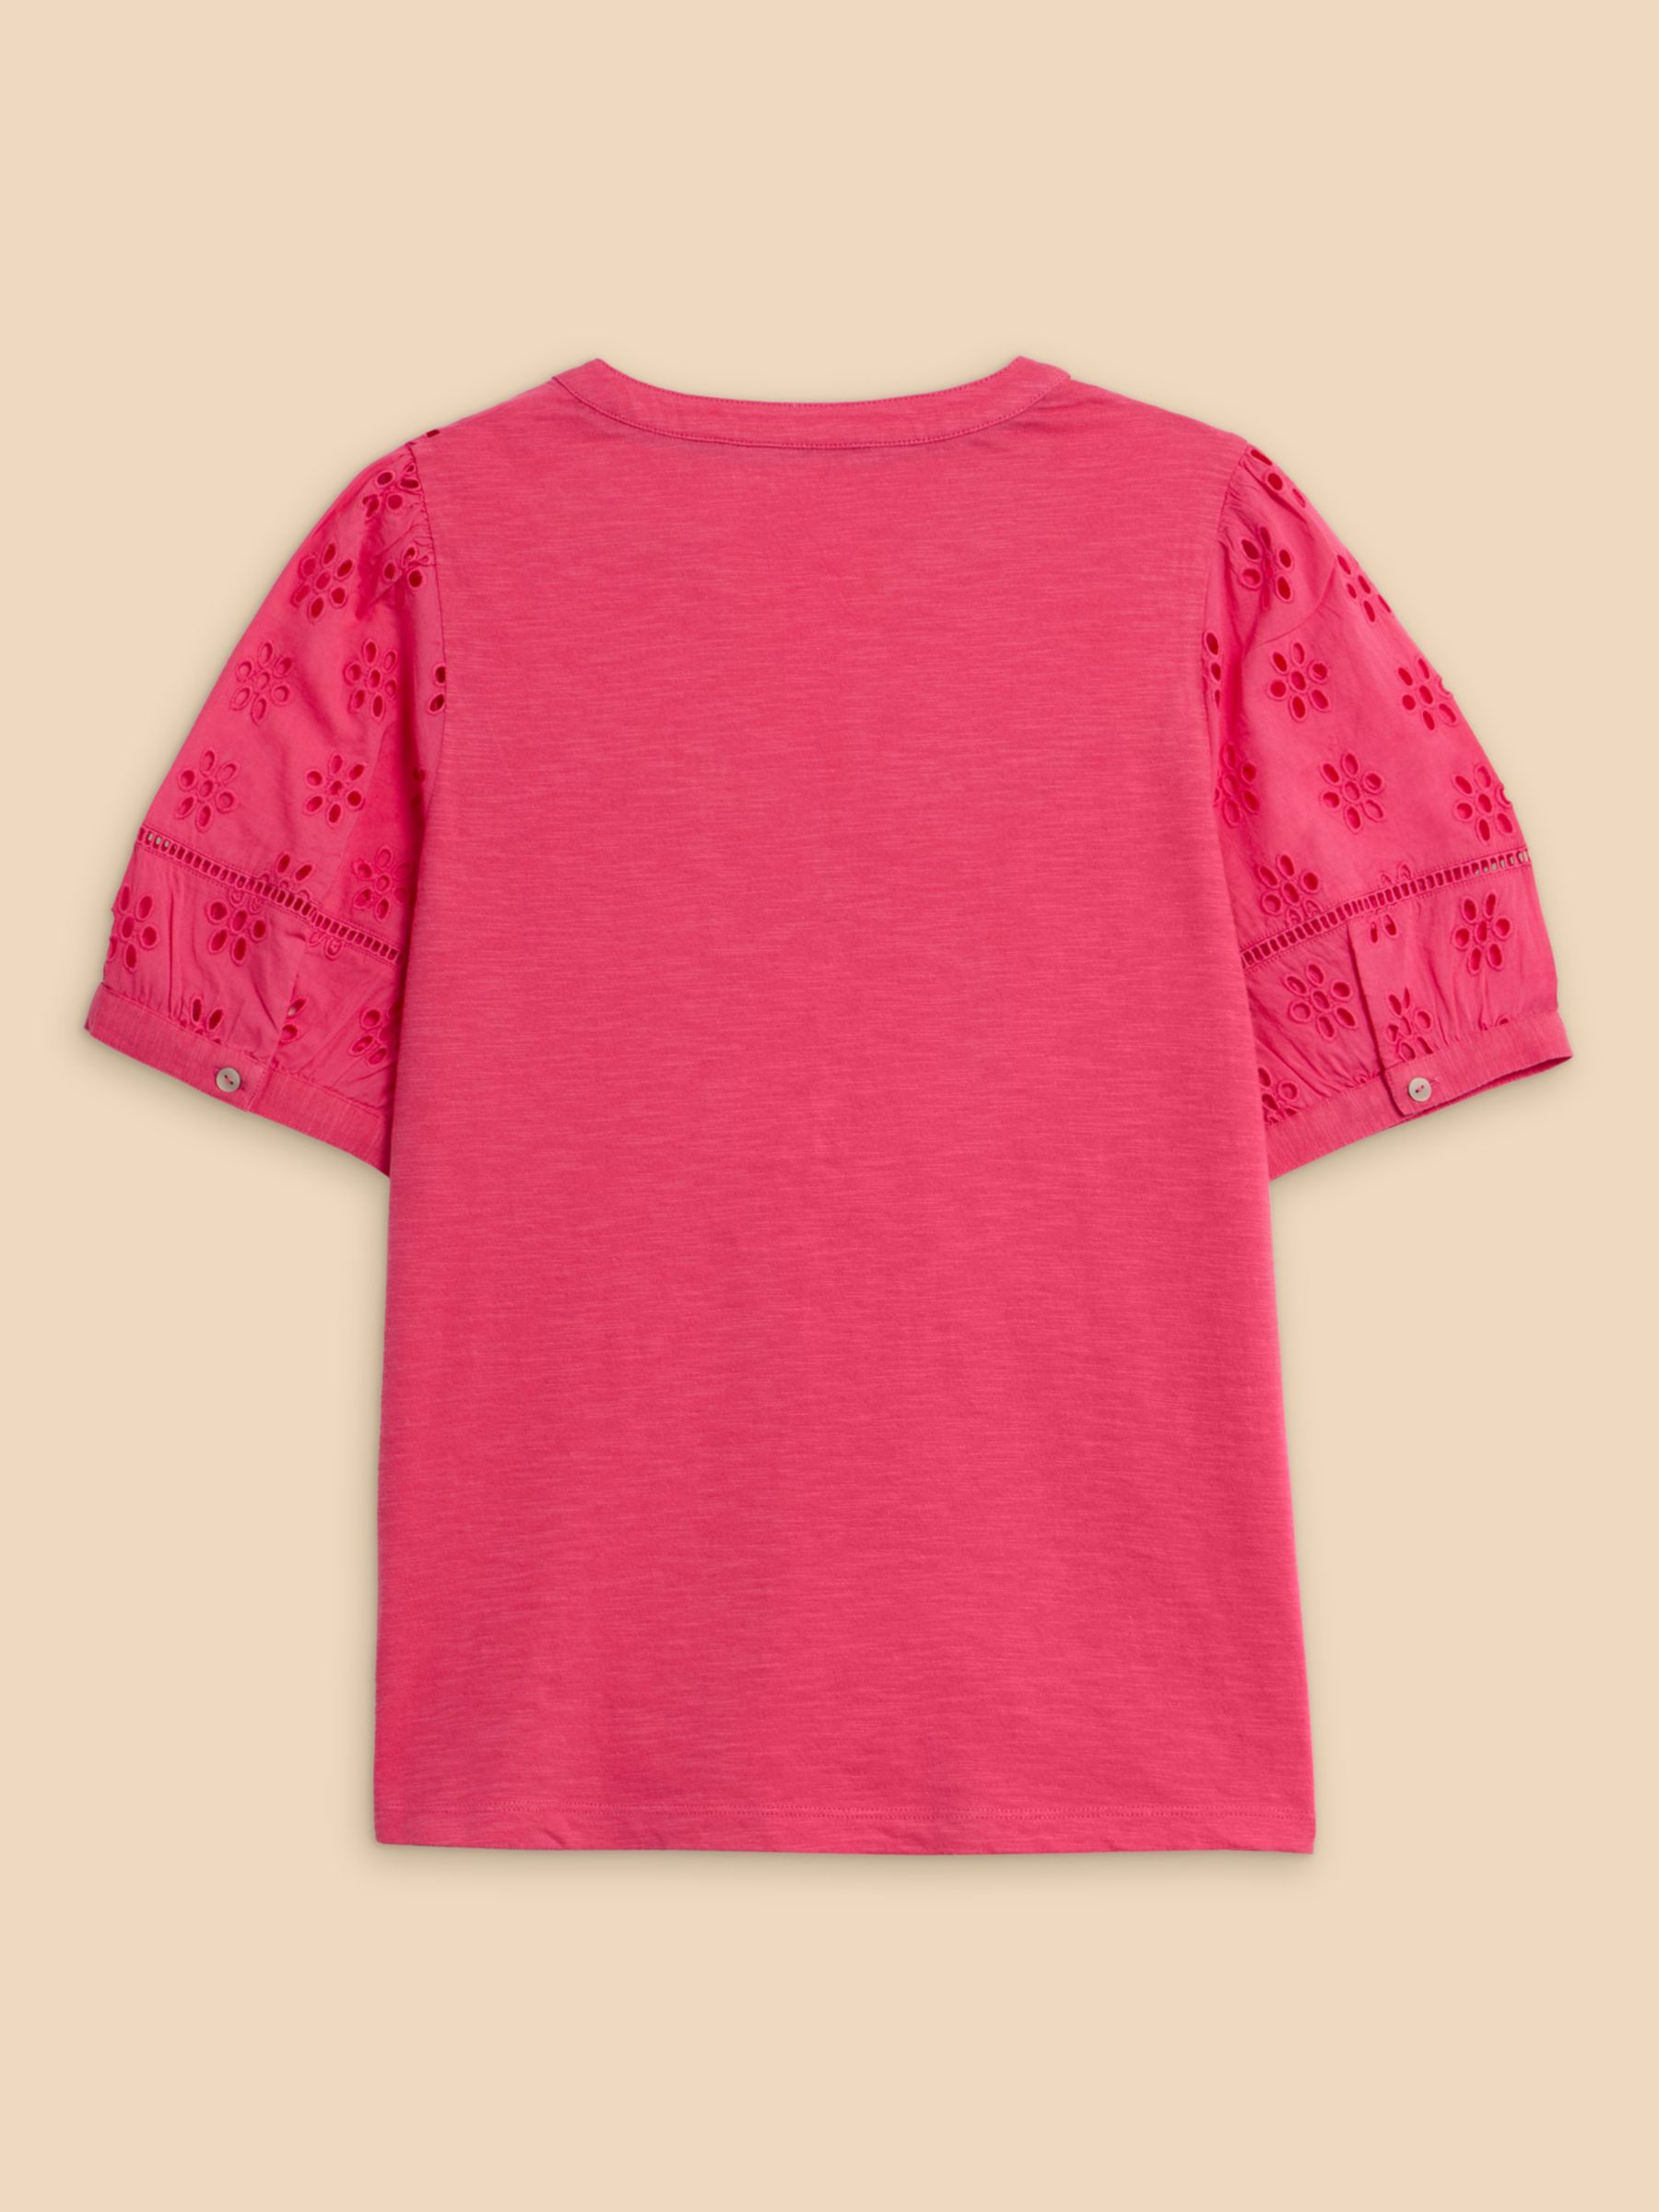 White Stuff Bella Cotton Broderie Top, Mid Pink at John Lewis & Partners